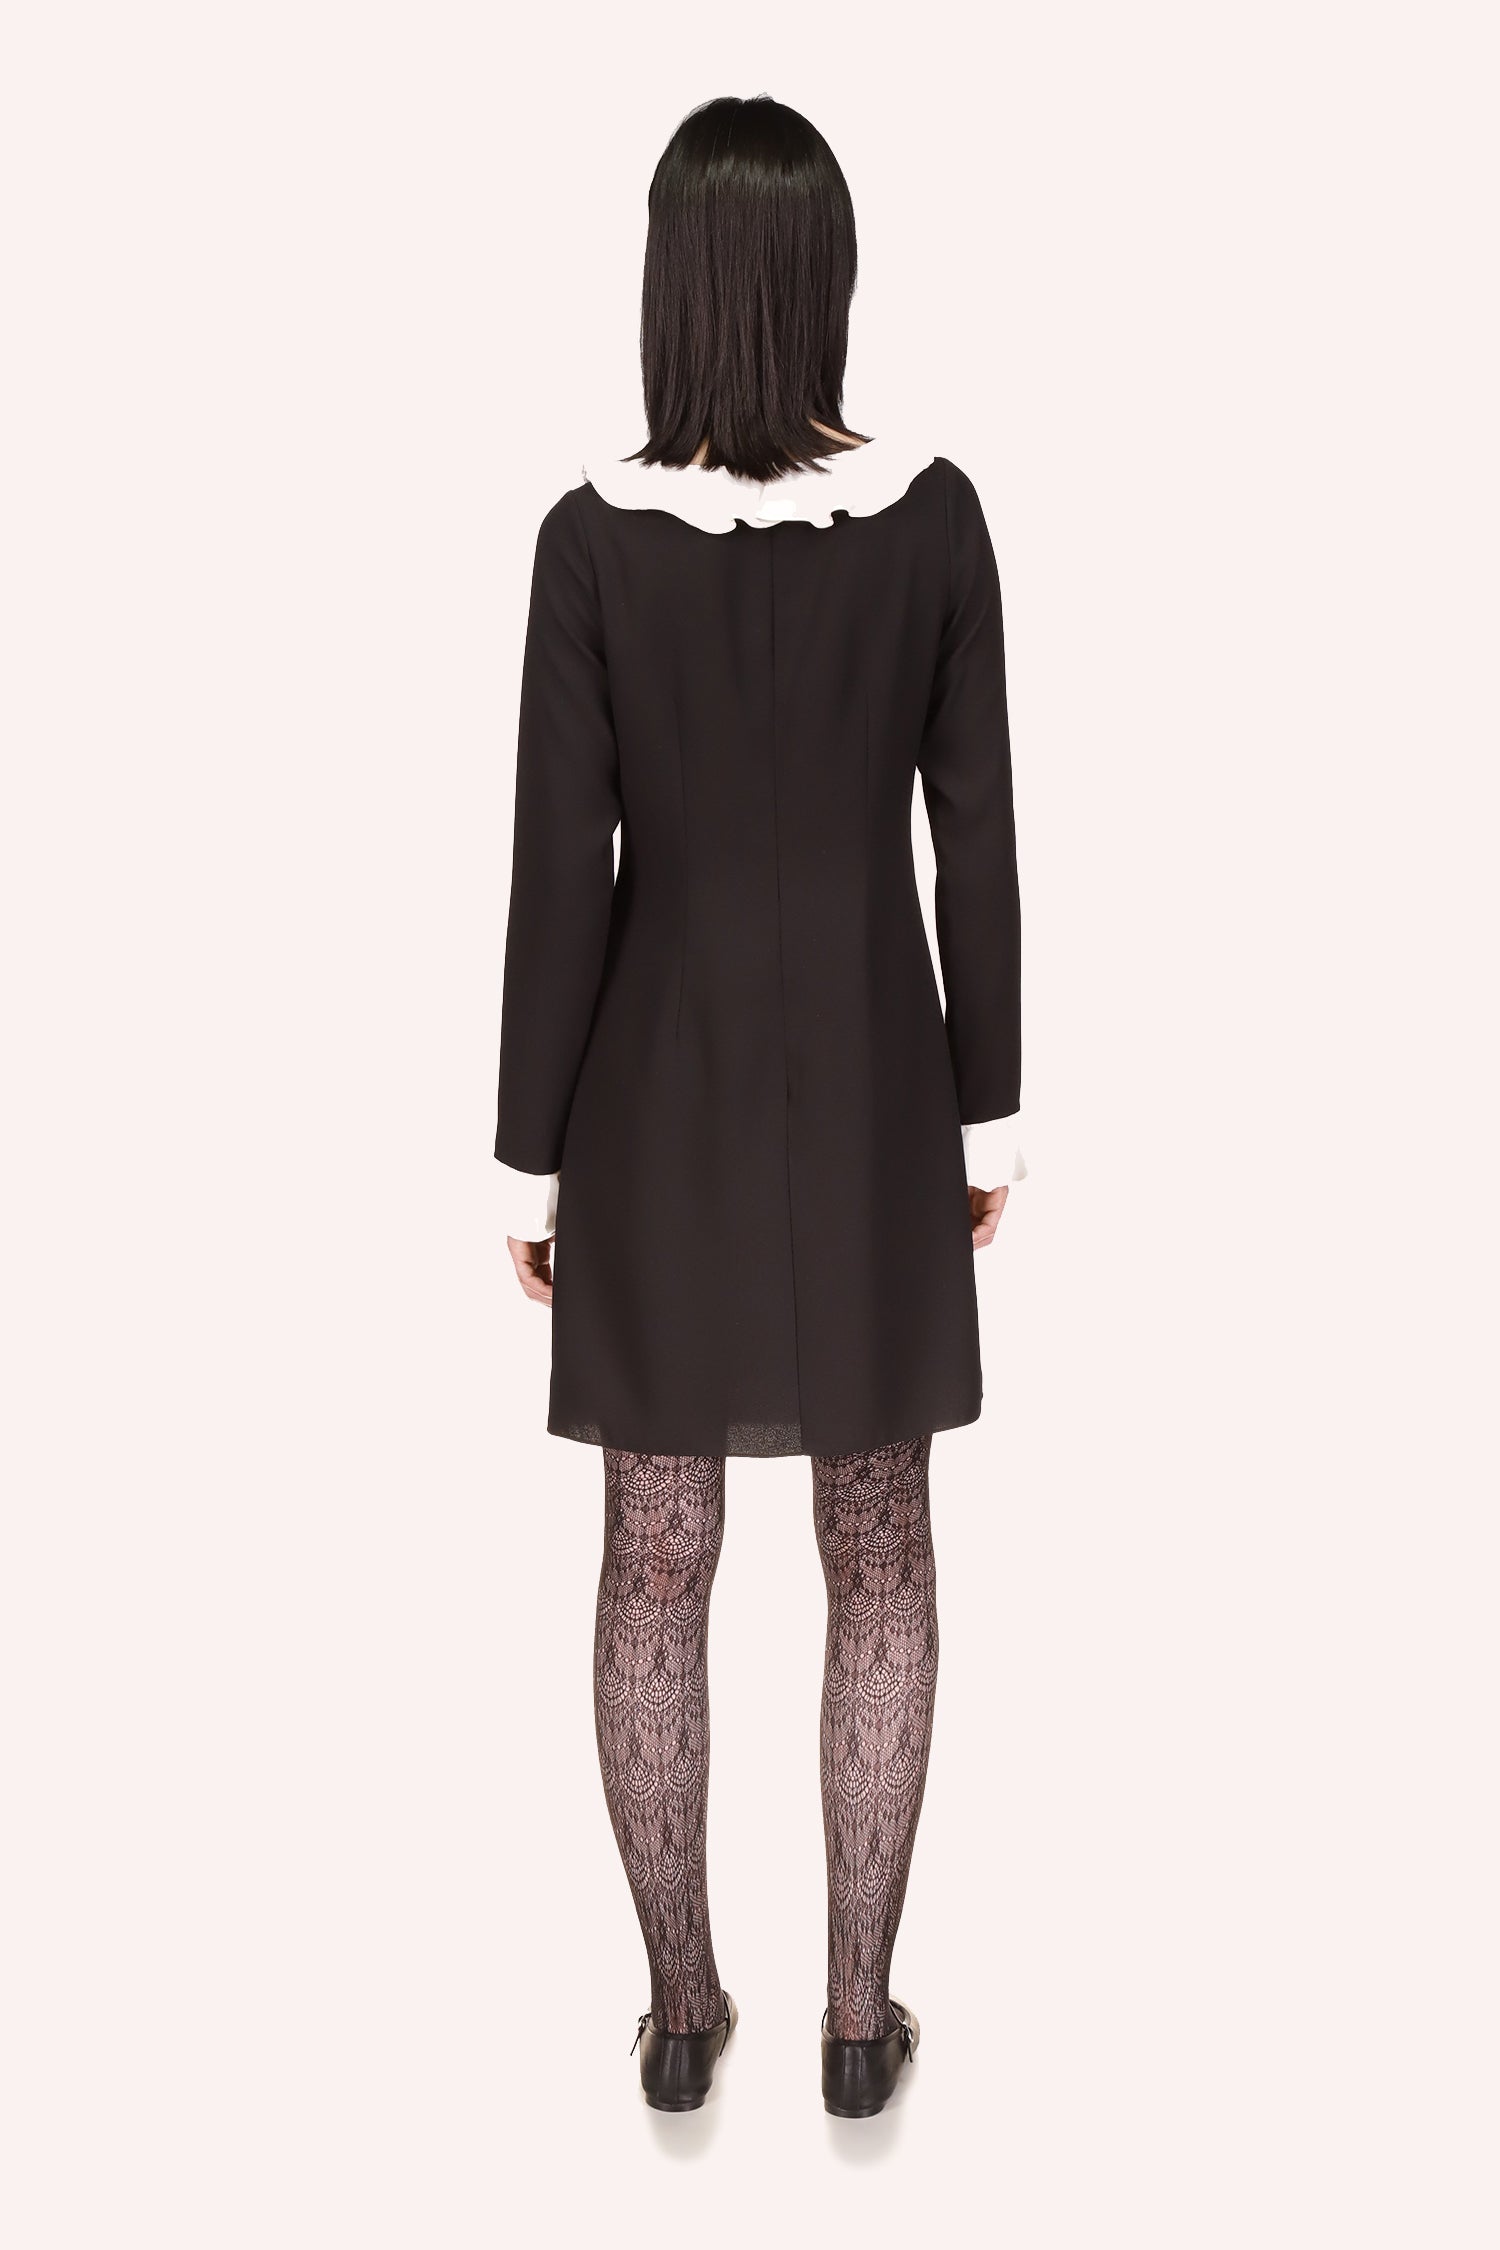 Back of a Black Dress, above-the-knee, vanilla crepe on the long sleeves and collar borders